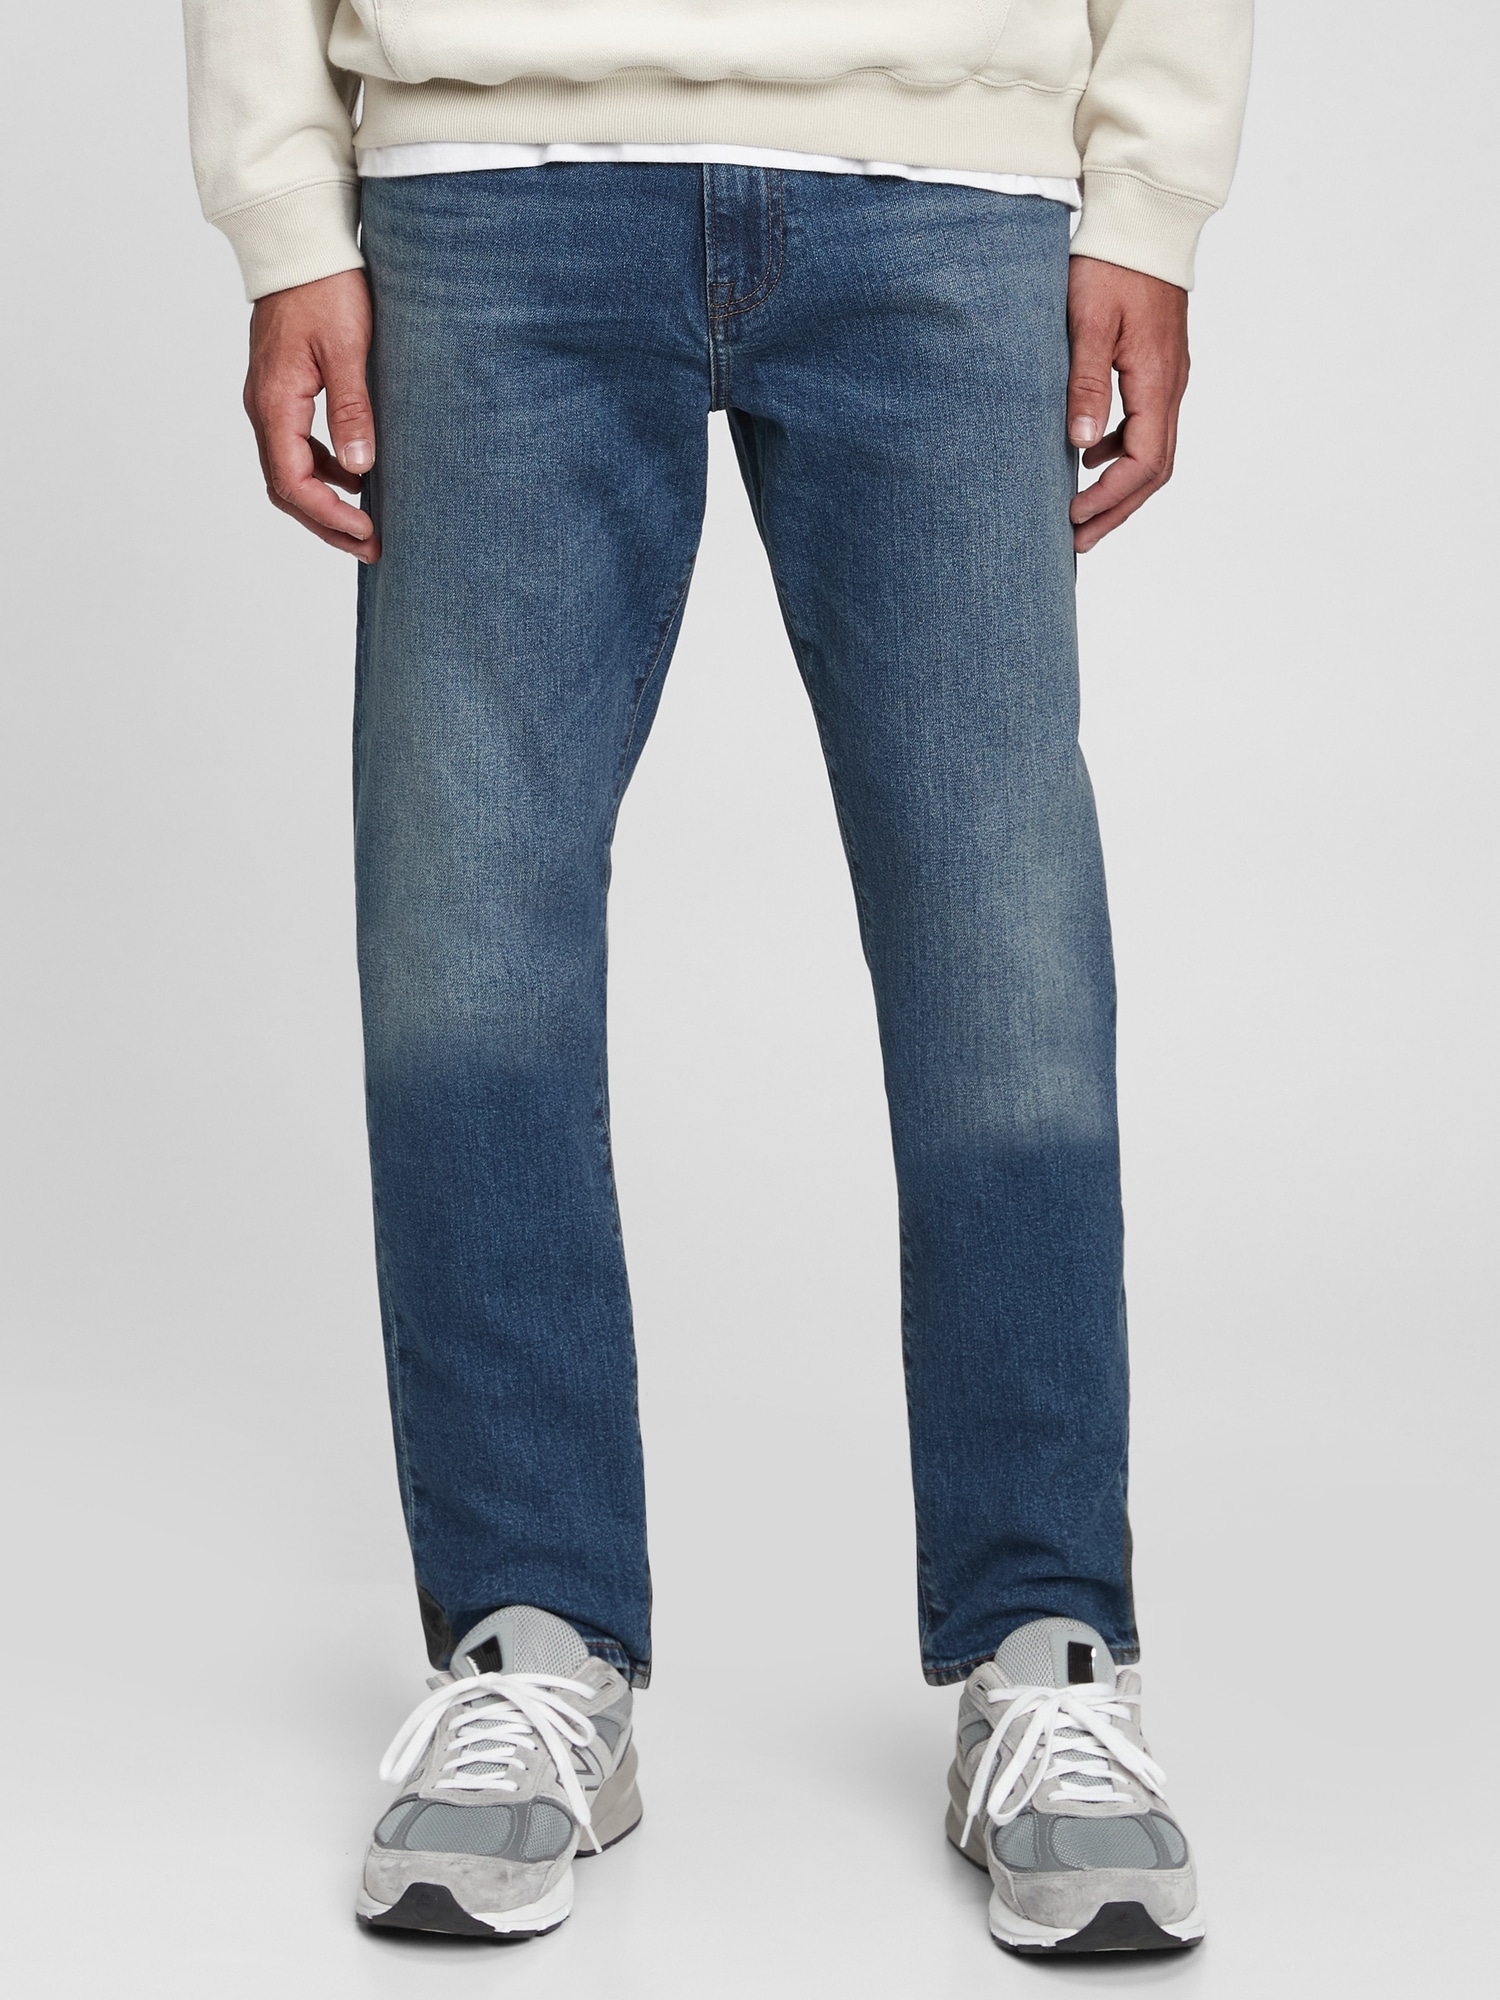 GAP Mens Soft Wear Skinny Fit Jeans, Resin Rinse 063, 30W x 30L US at   Men's Clothing store